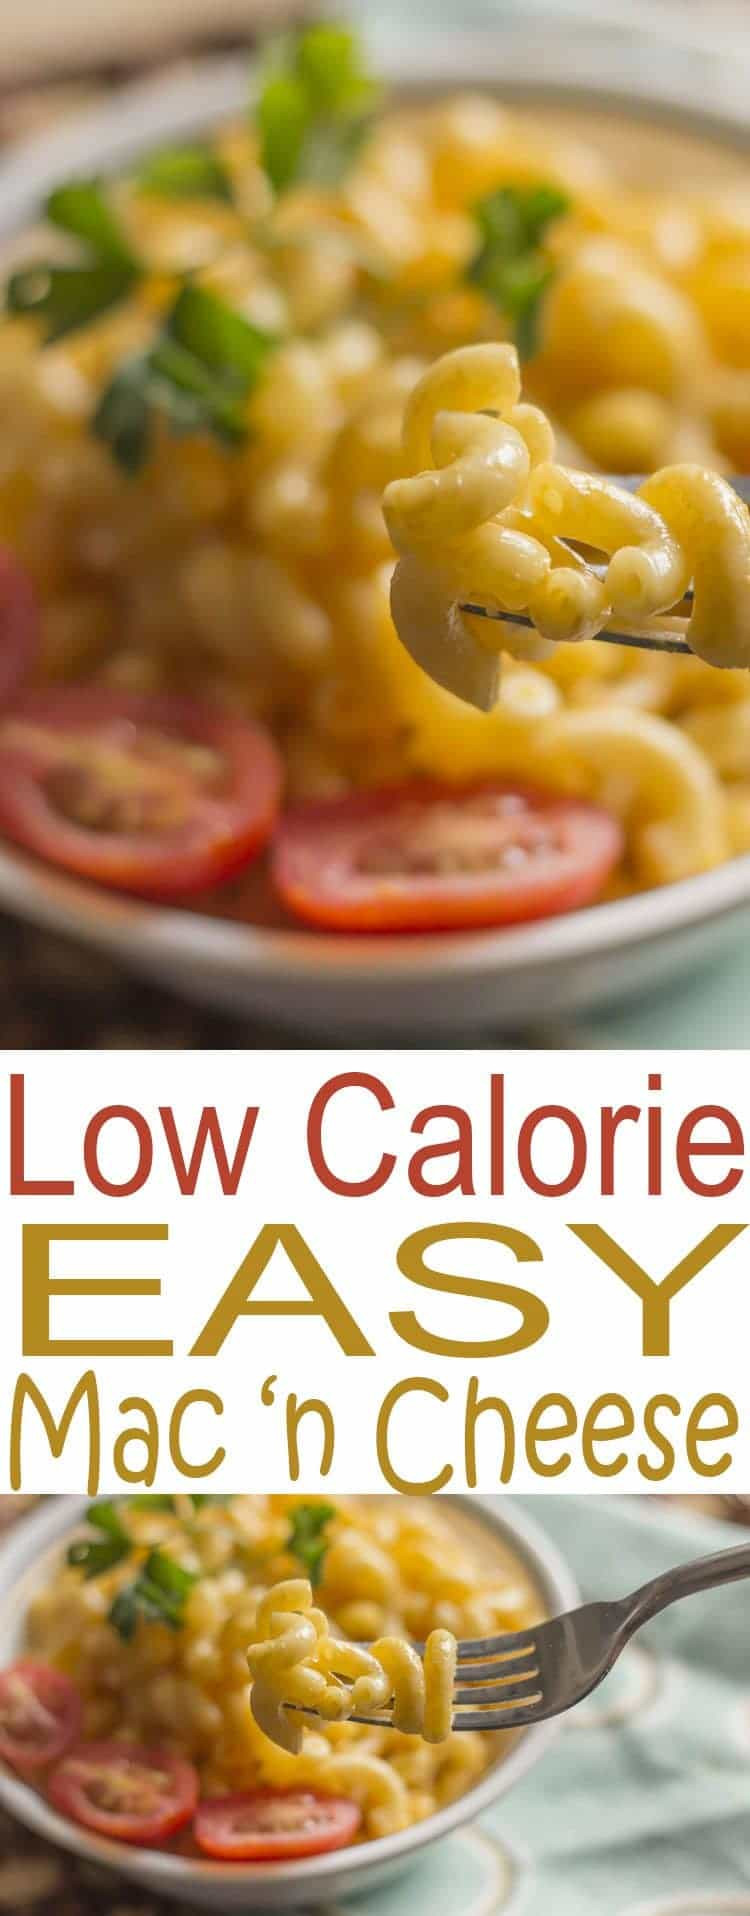 Low Calorie Macaroni And Cheese Recipes
 Weight Watchers Mac And Cheese Easy and Tasty Recipe